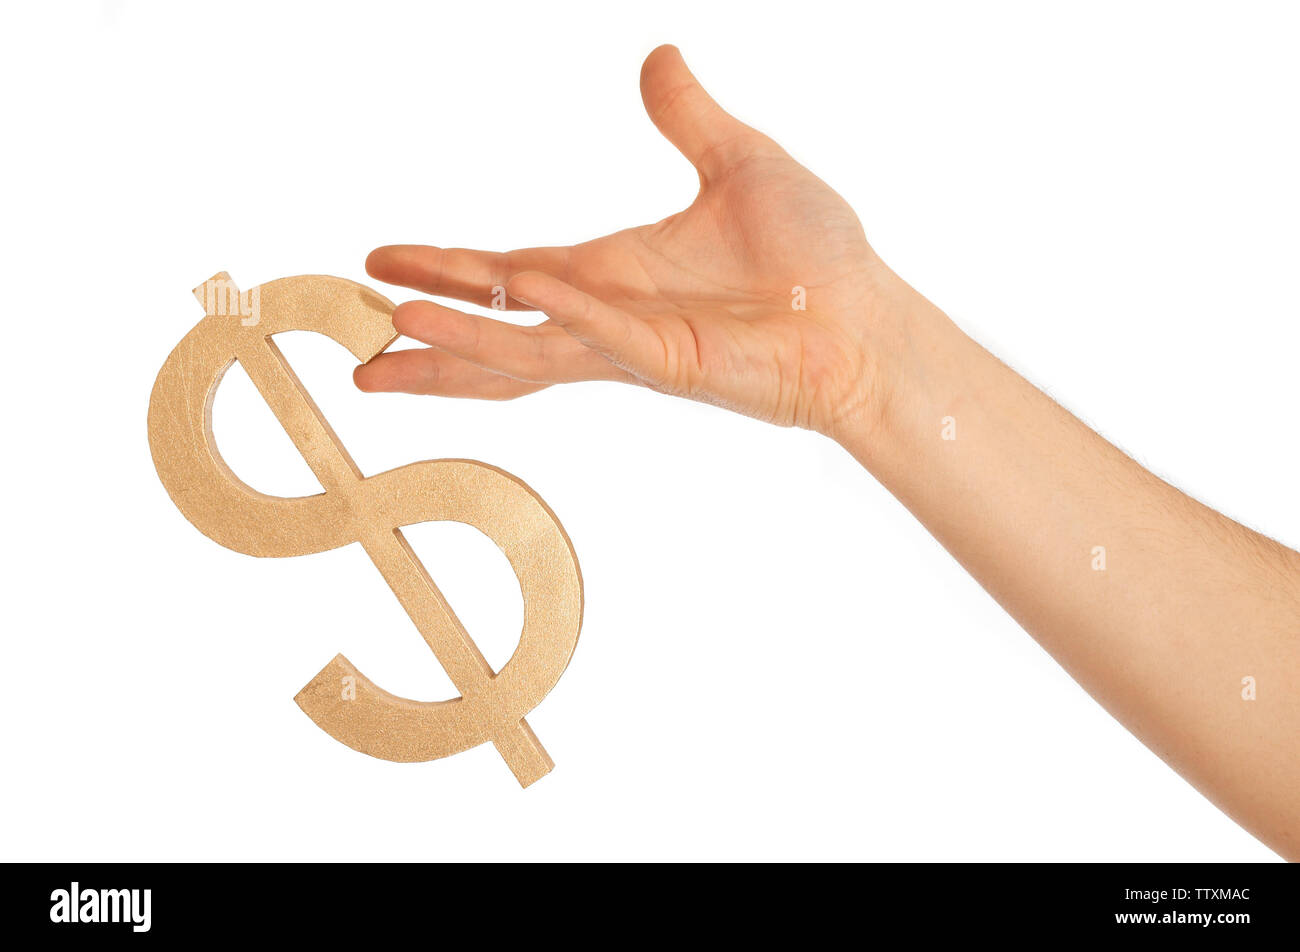 dollar sign is nearly falling from hand, on white Stock Photo